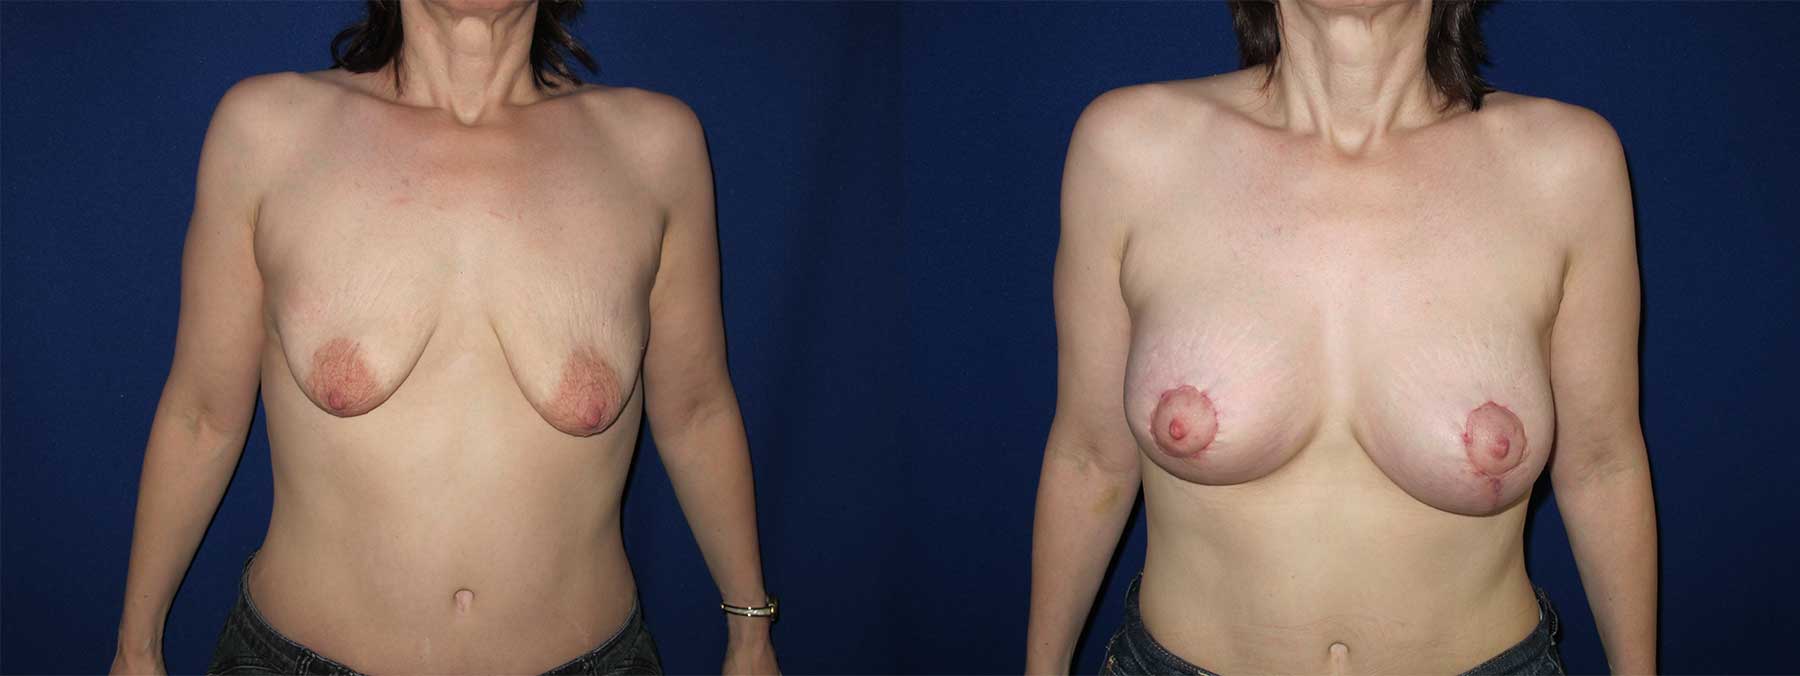 Before and After Image of Augmentation Mastoplexy